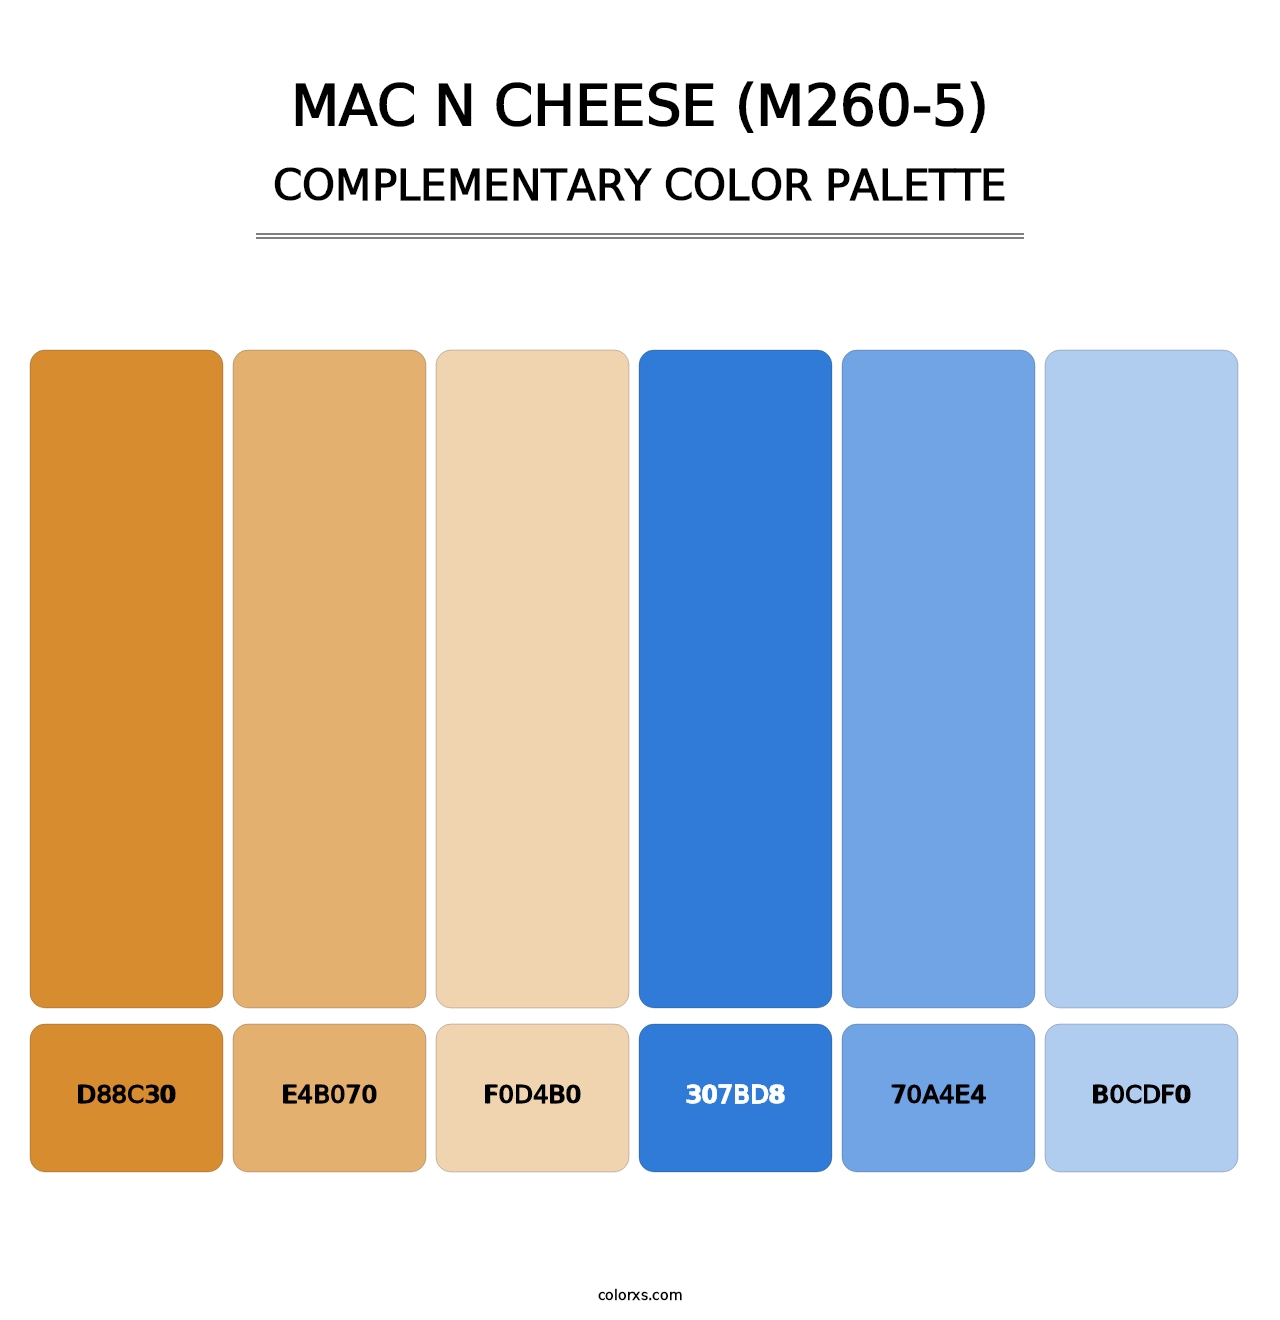 Mac N Cheese (M260-5) - Complementary Color Palette